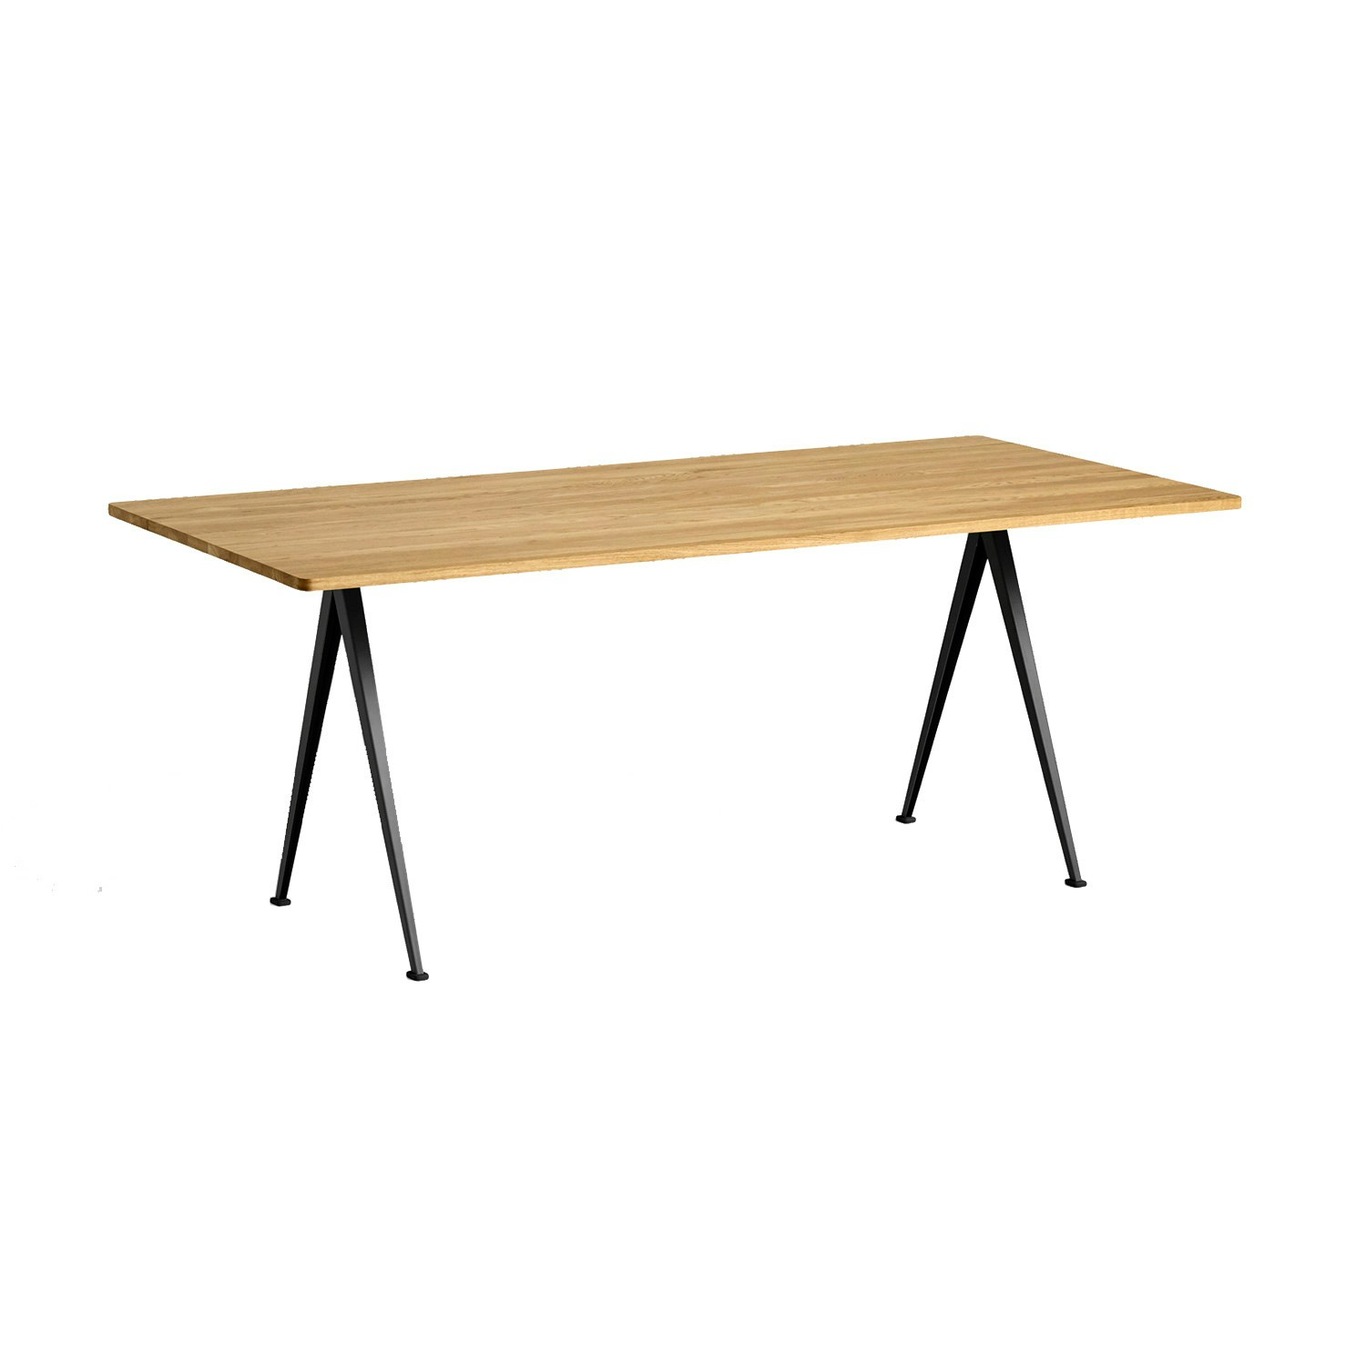 Pyramid 02 Dining Table 85x190 cm, Black / Lacquered Oak